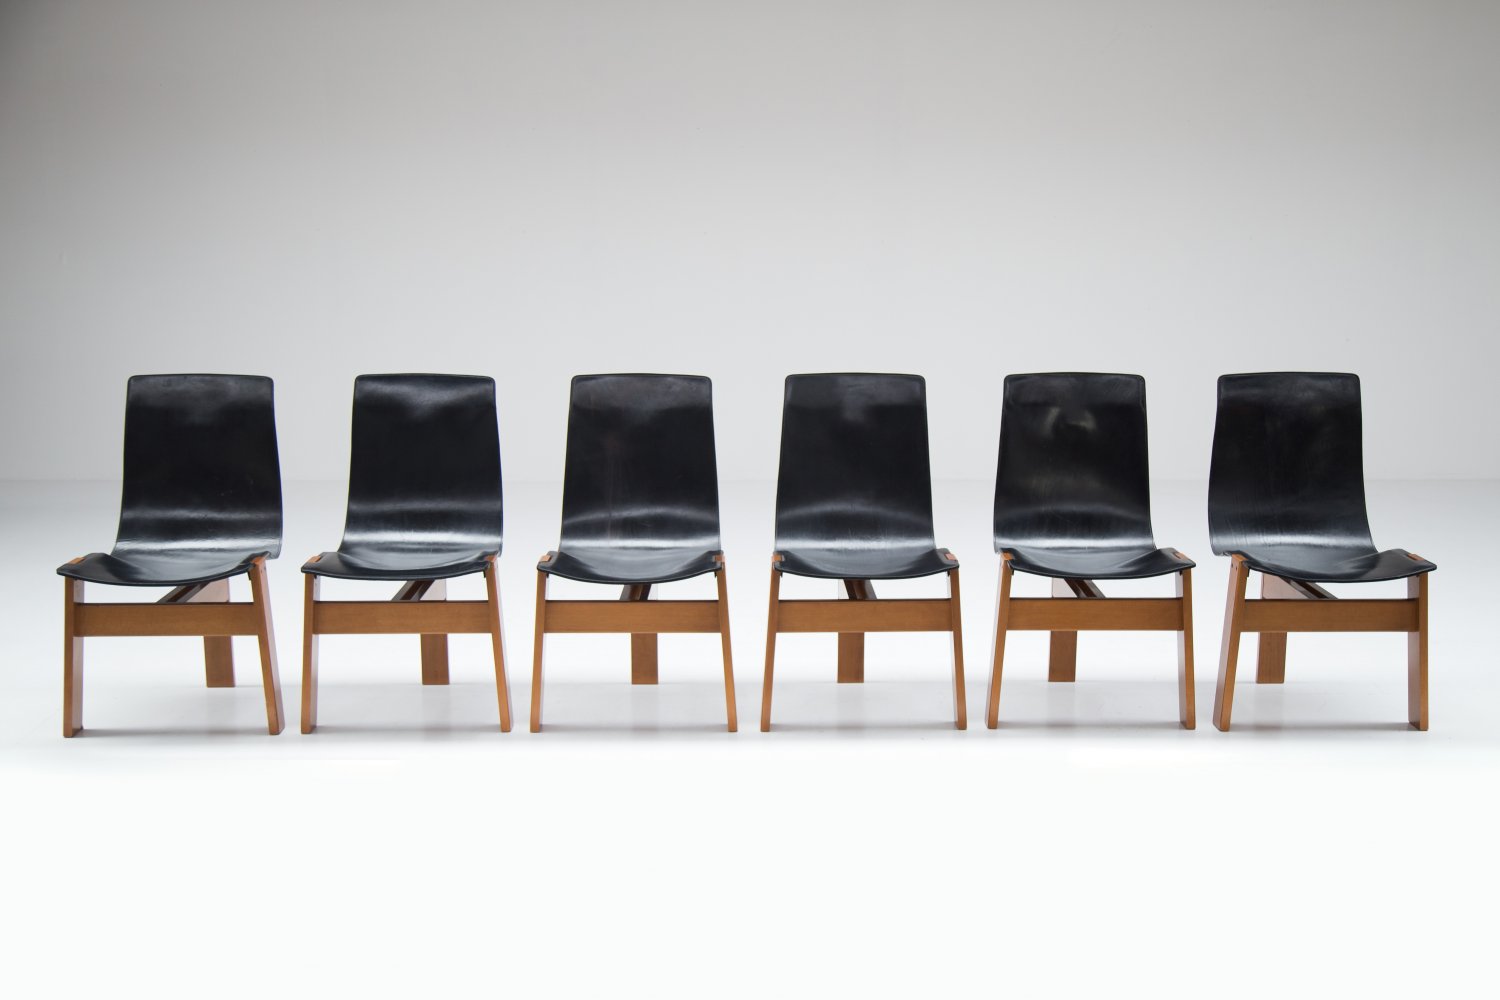 Set of 6 chairs by Angelo Mangiarotti for Skipper.